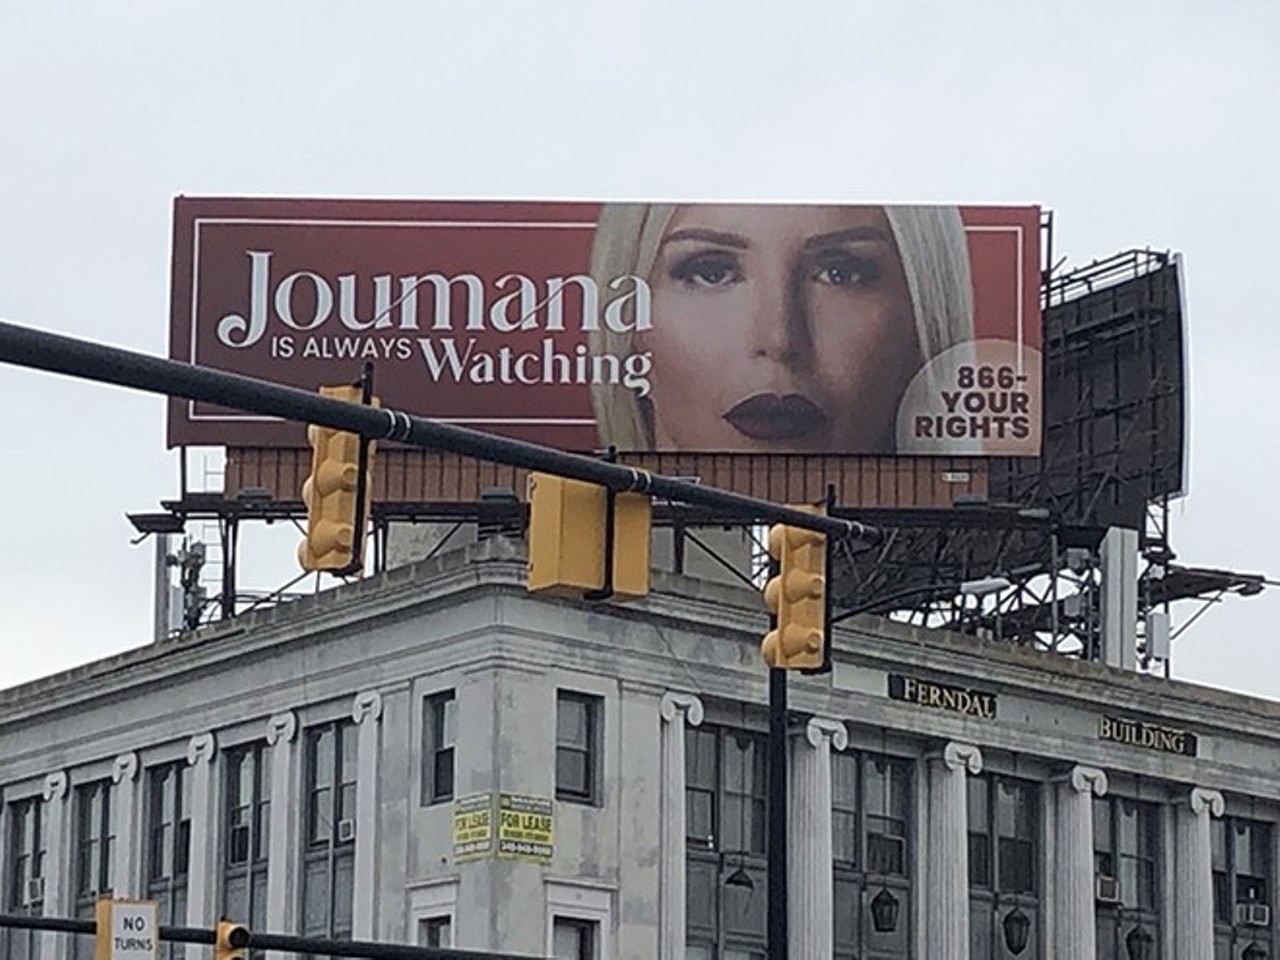 Joumana
If you’ve driven the freeways in Detroit, you’ve likely seen billboards of local lawyer Joumana Kayrouz, often with the famous line “Joumana is always watching.” She’s just an icon and all Detroiters know it. 